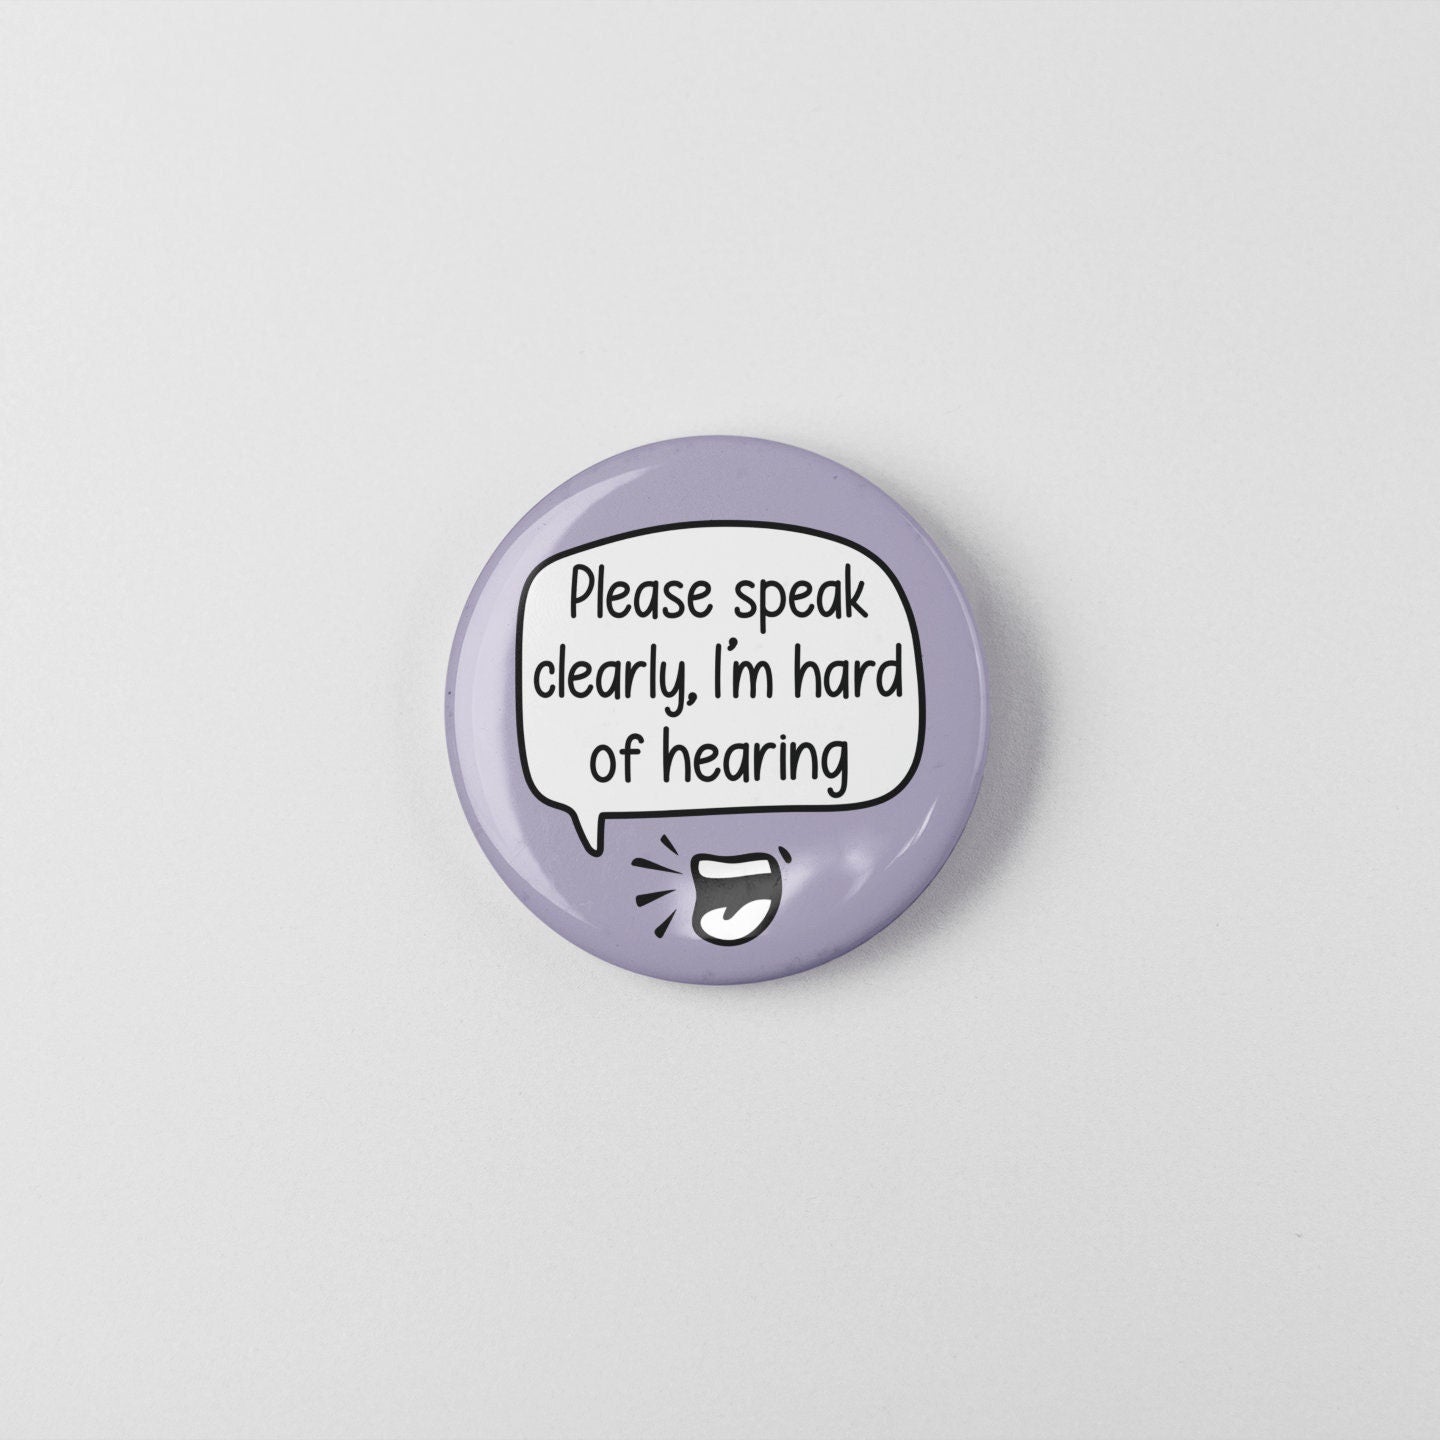 Please Speak Clearly, I'm Hard Of Hearing - Badge Pin | Hearing Impairment